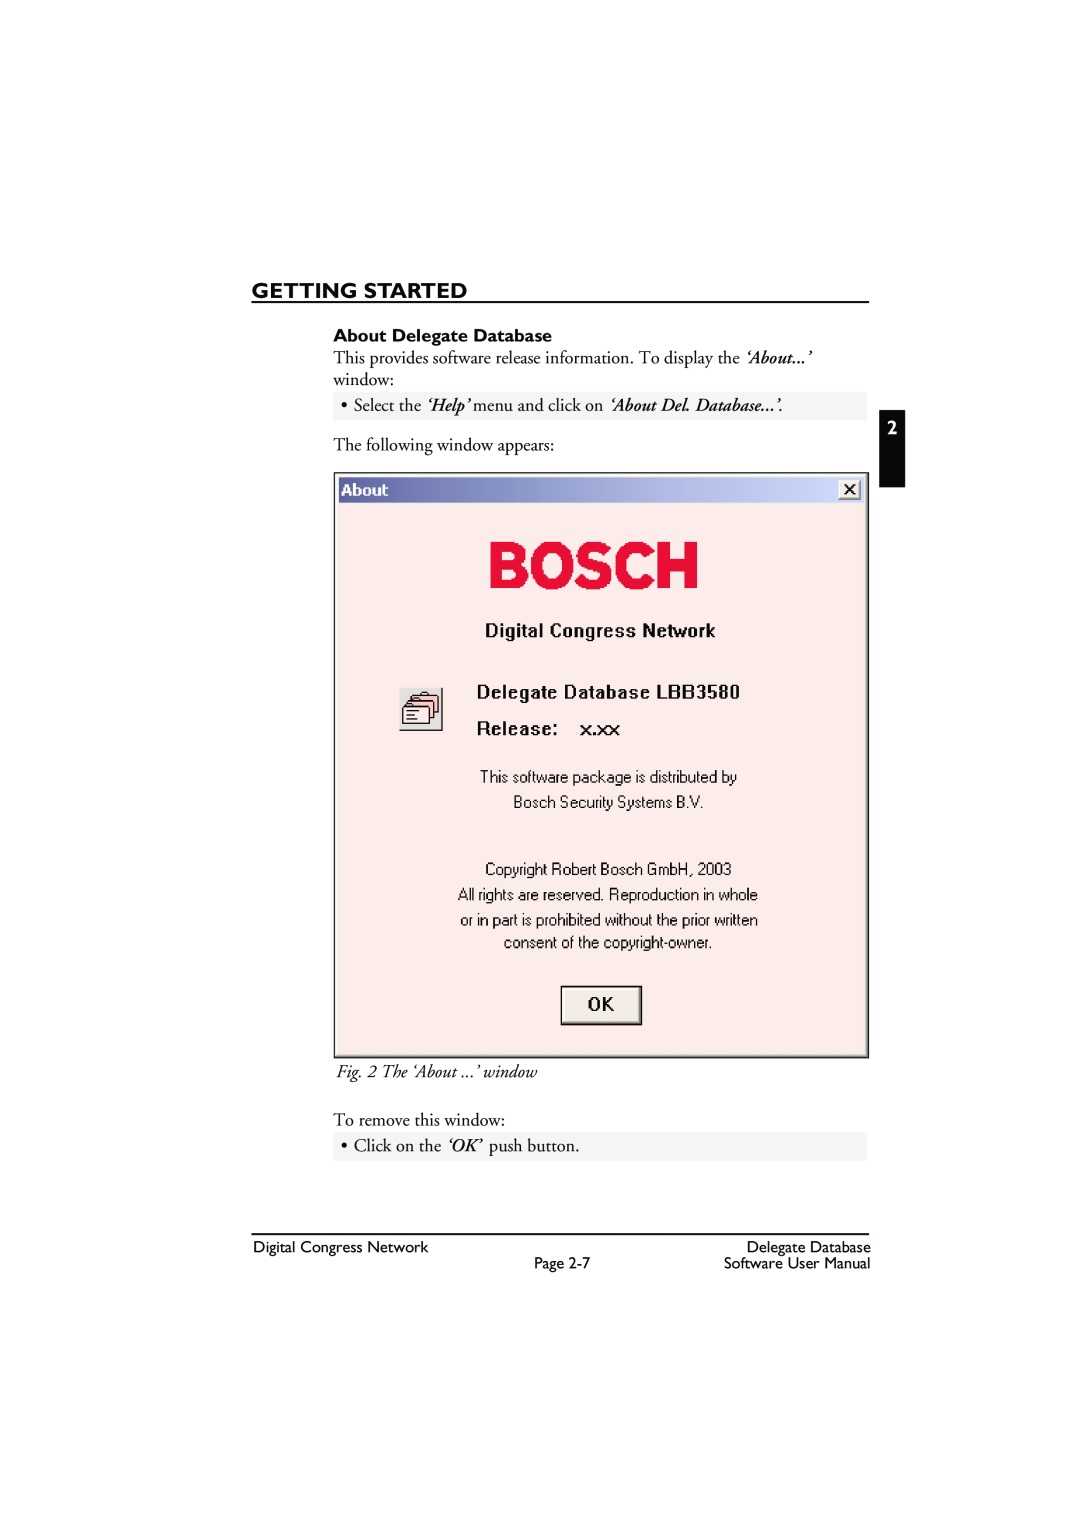 Bosch Appliances LBB3580 About Delegate Database, The ‘About ...’ window, Getting Started, The following window appears 